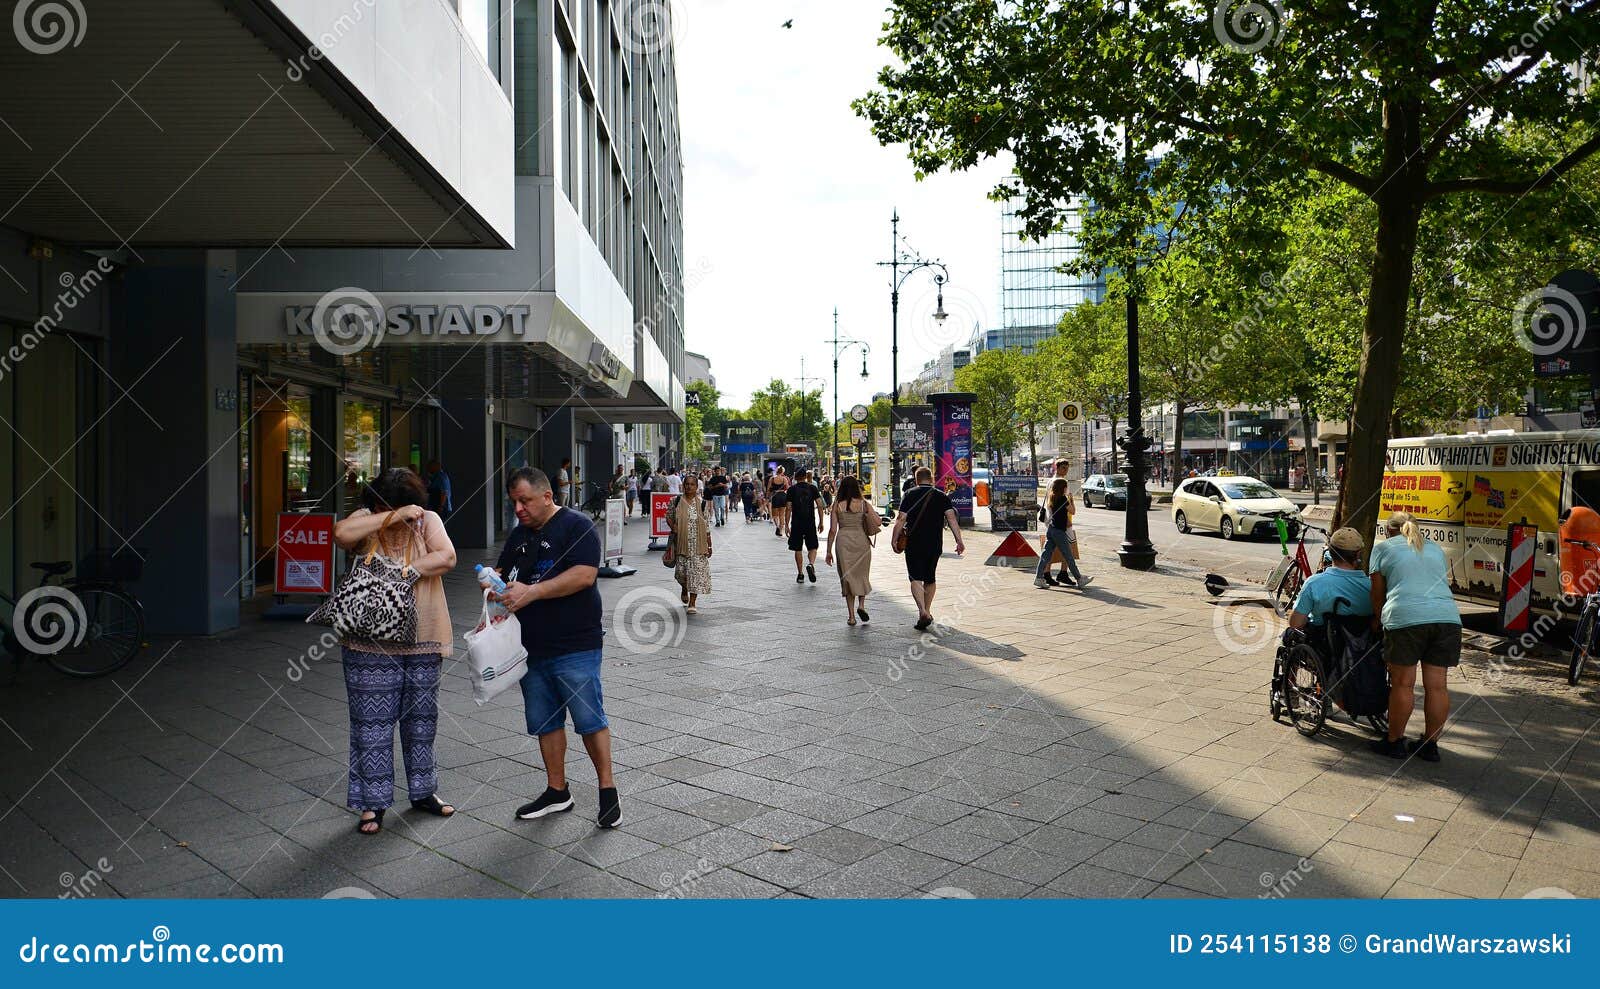 Berlin Fashion Shopping Stock Photo - Download Image Now